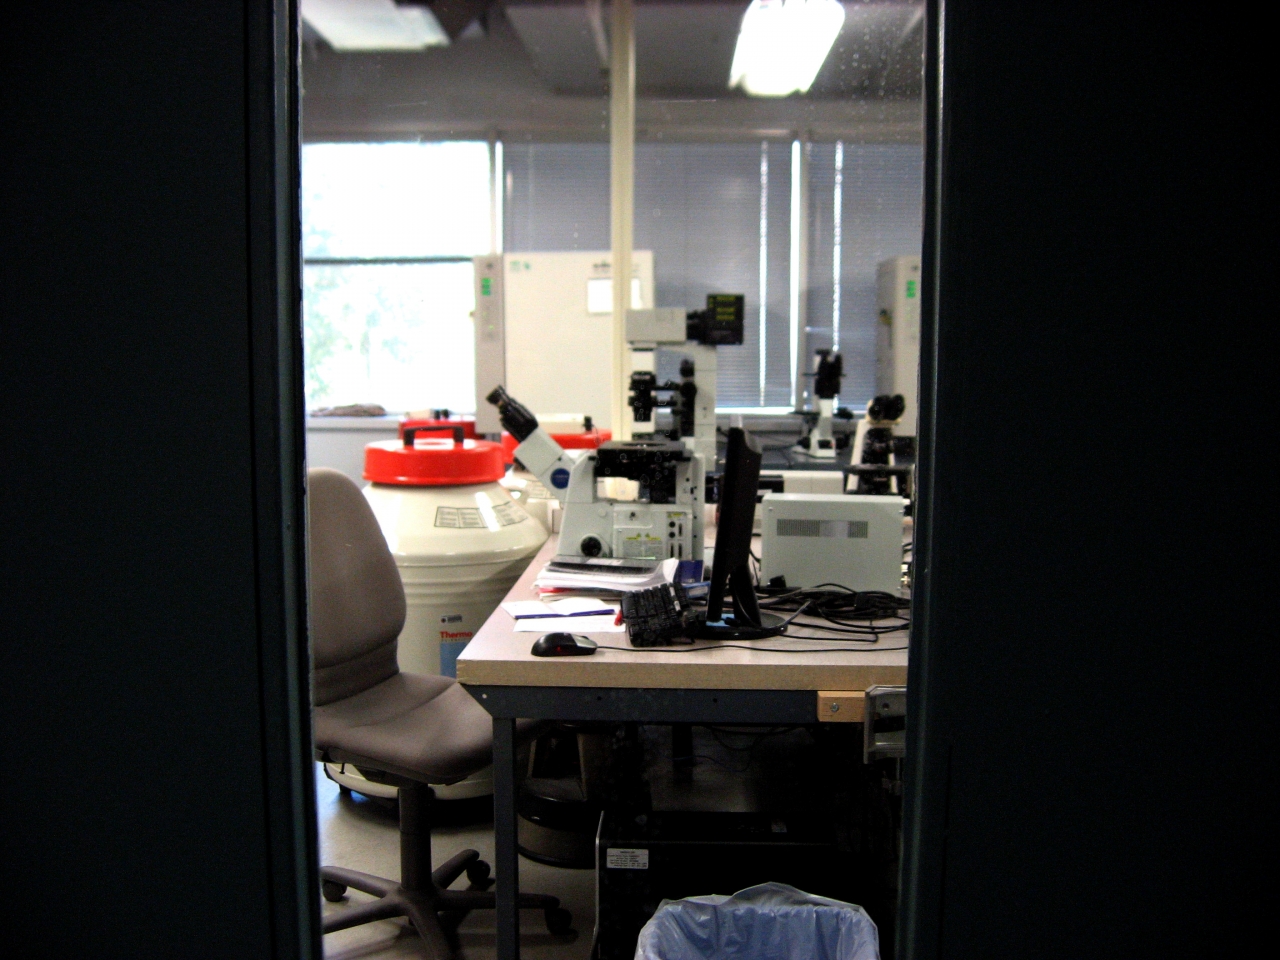 Microscope stations in a laboratory.